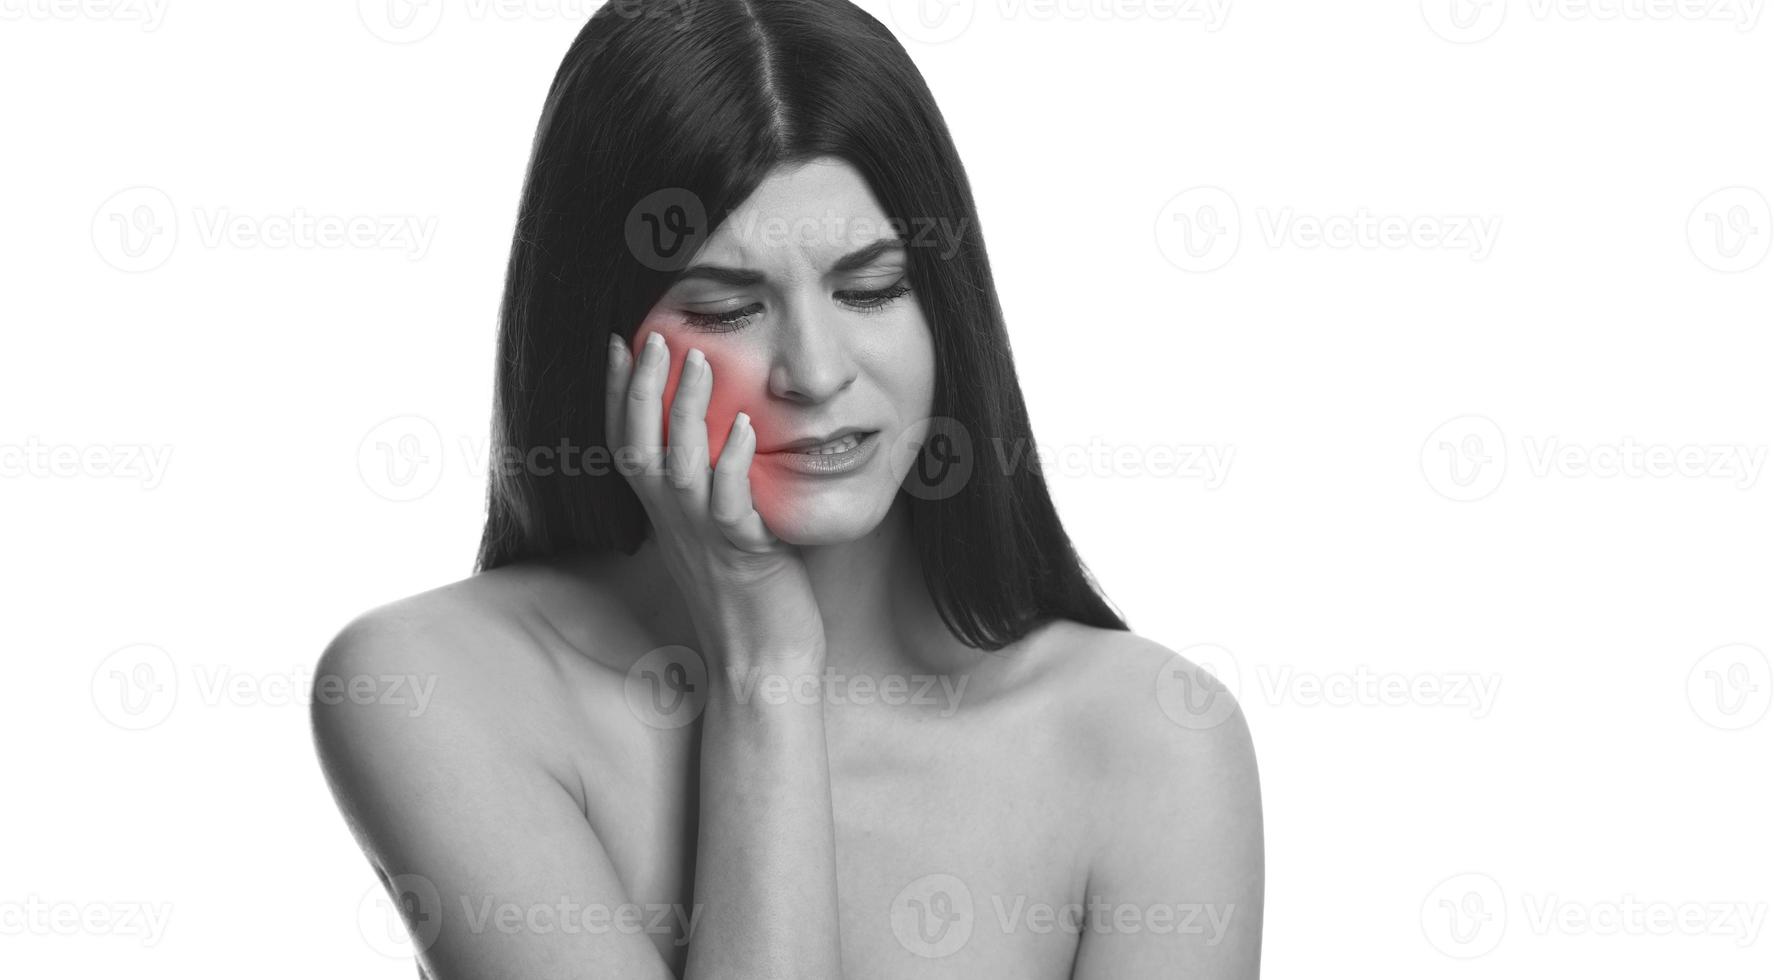 black and white photo of a woman with toothache. Toothache lighten with red.